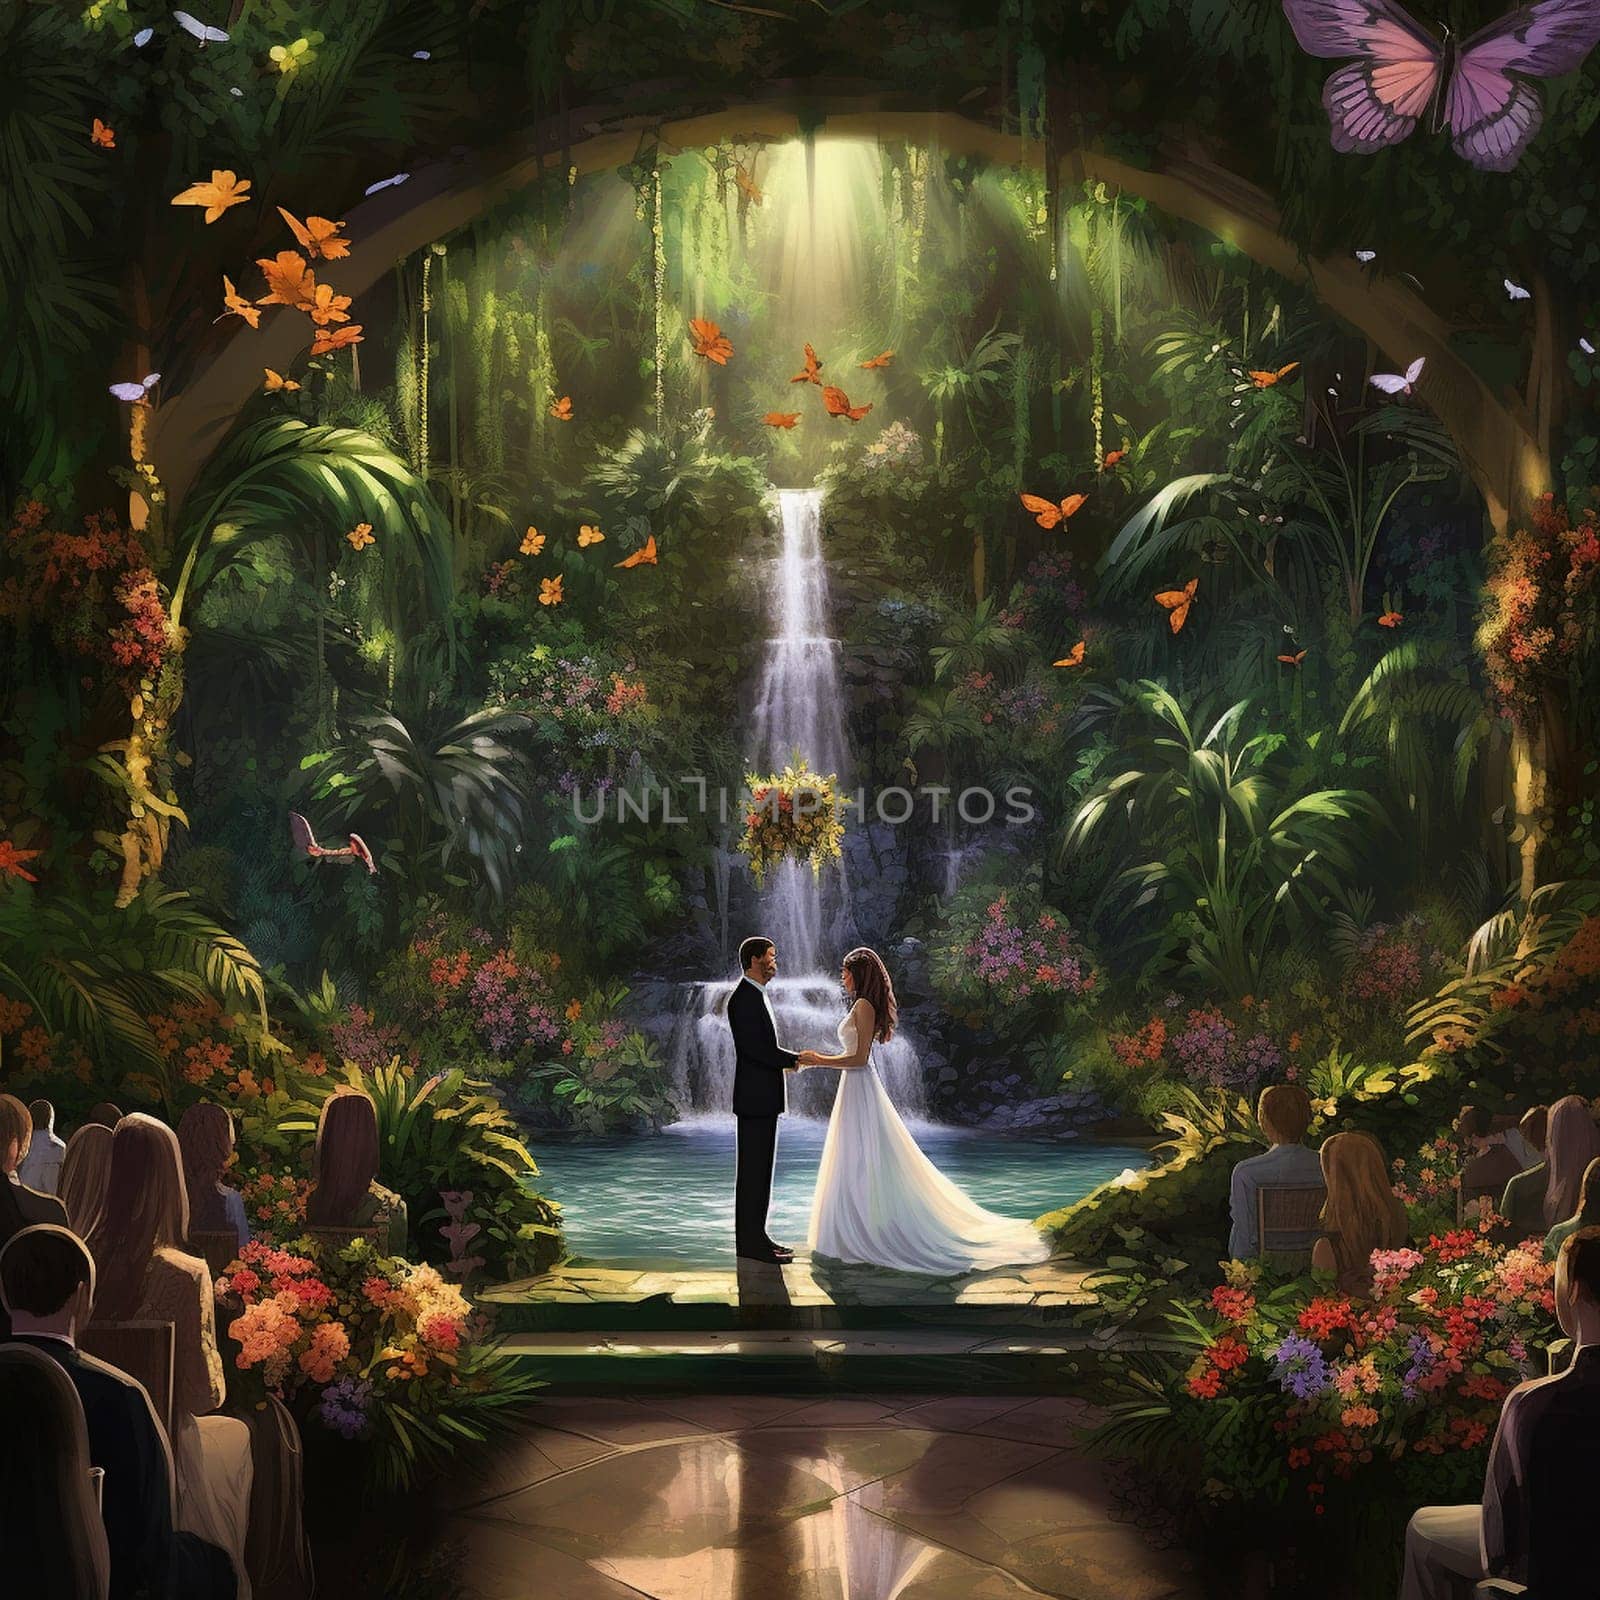 Emerald Oasis: Vows Exchanged in a Verdant Sanctuary by Sahin